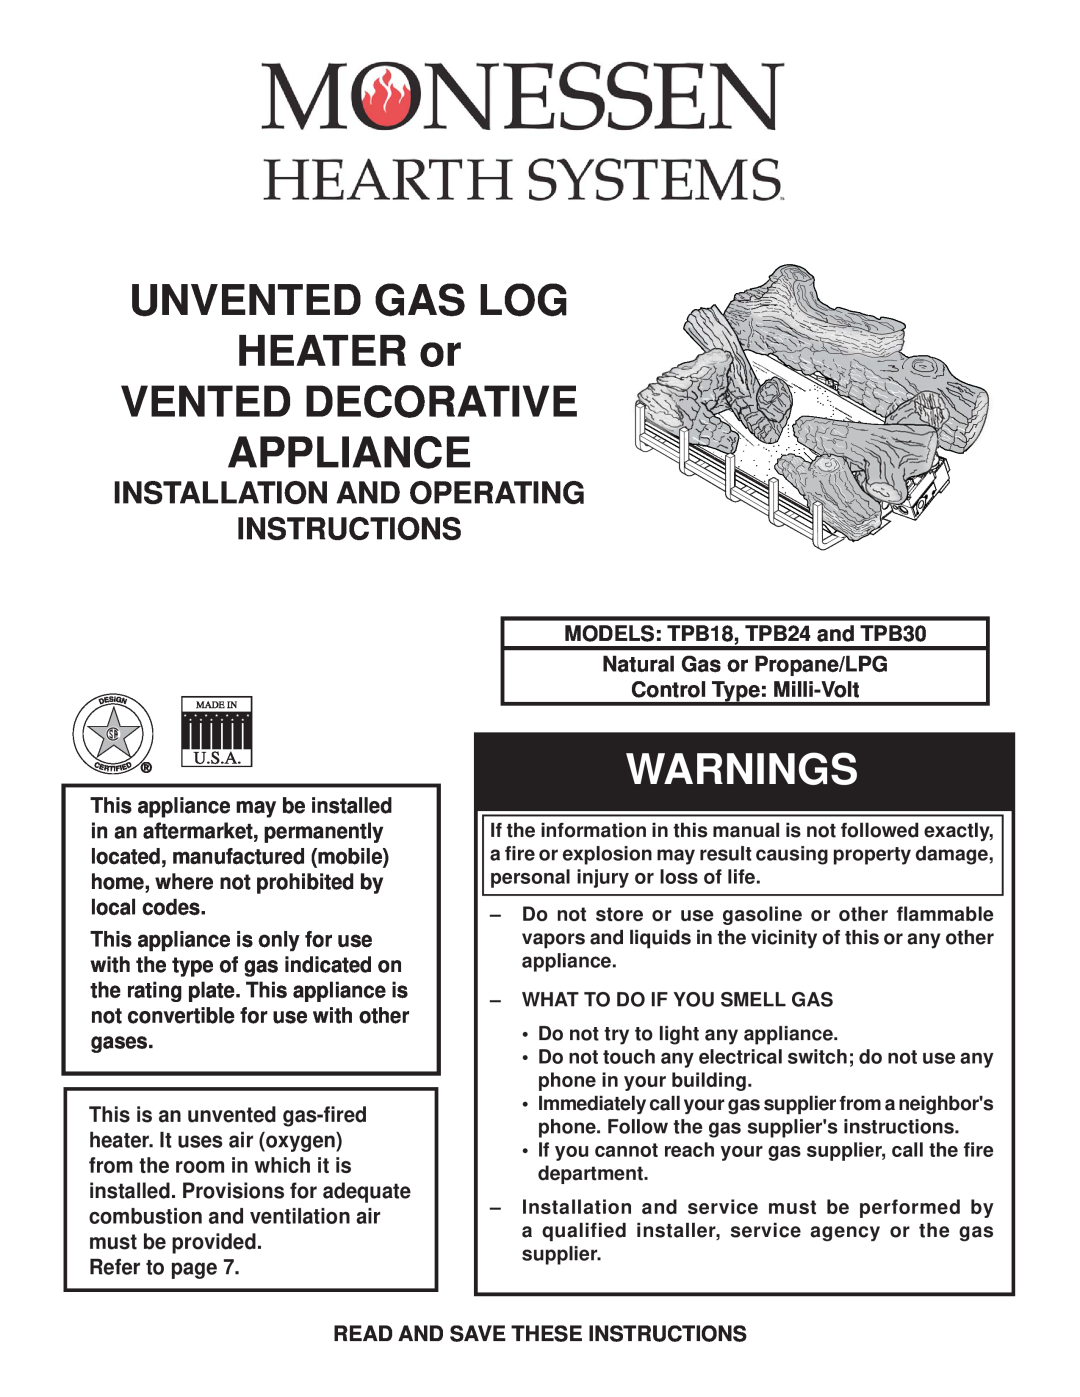 Monessen Hearth TPB24, TPB30 manual Installation And Operating Instructions, UNVENTED GAS LOG HEATER or VENTED DECORATIVE 